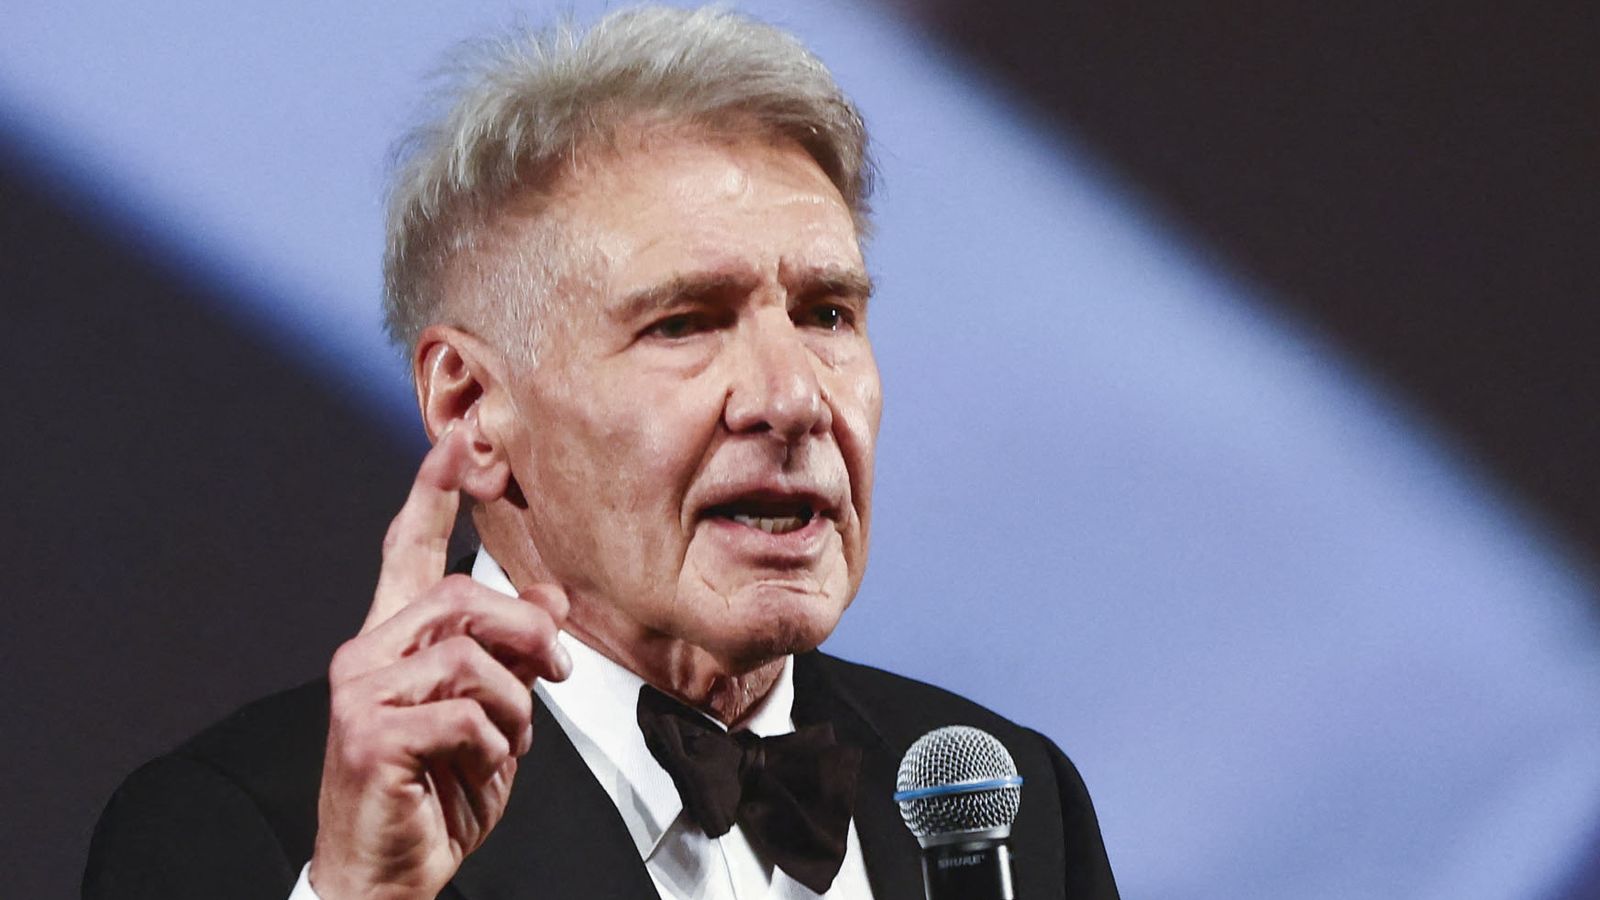 Harrison Ford 'deeply moved and humbled' by honorary Palme d'Or as he attends Indiana Jones premiere